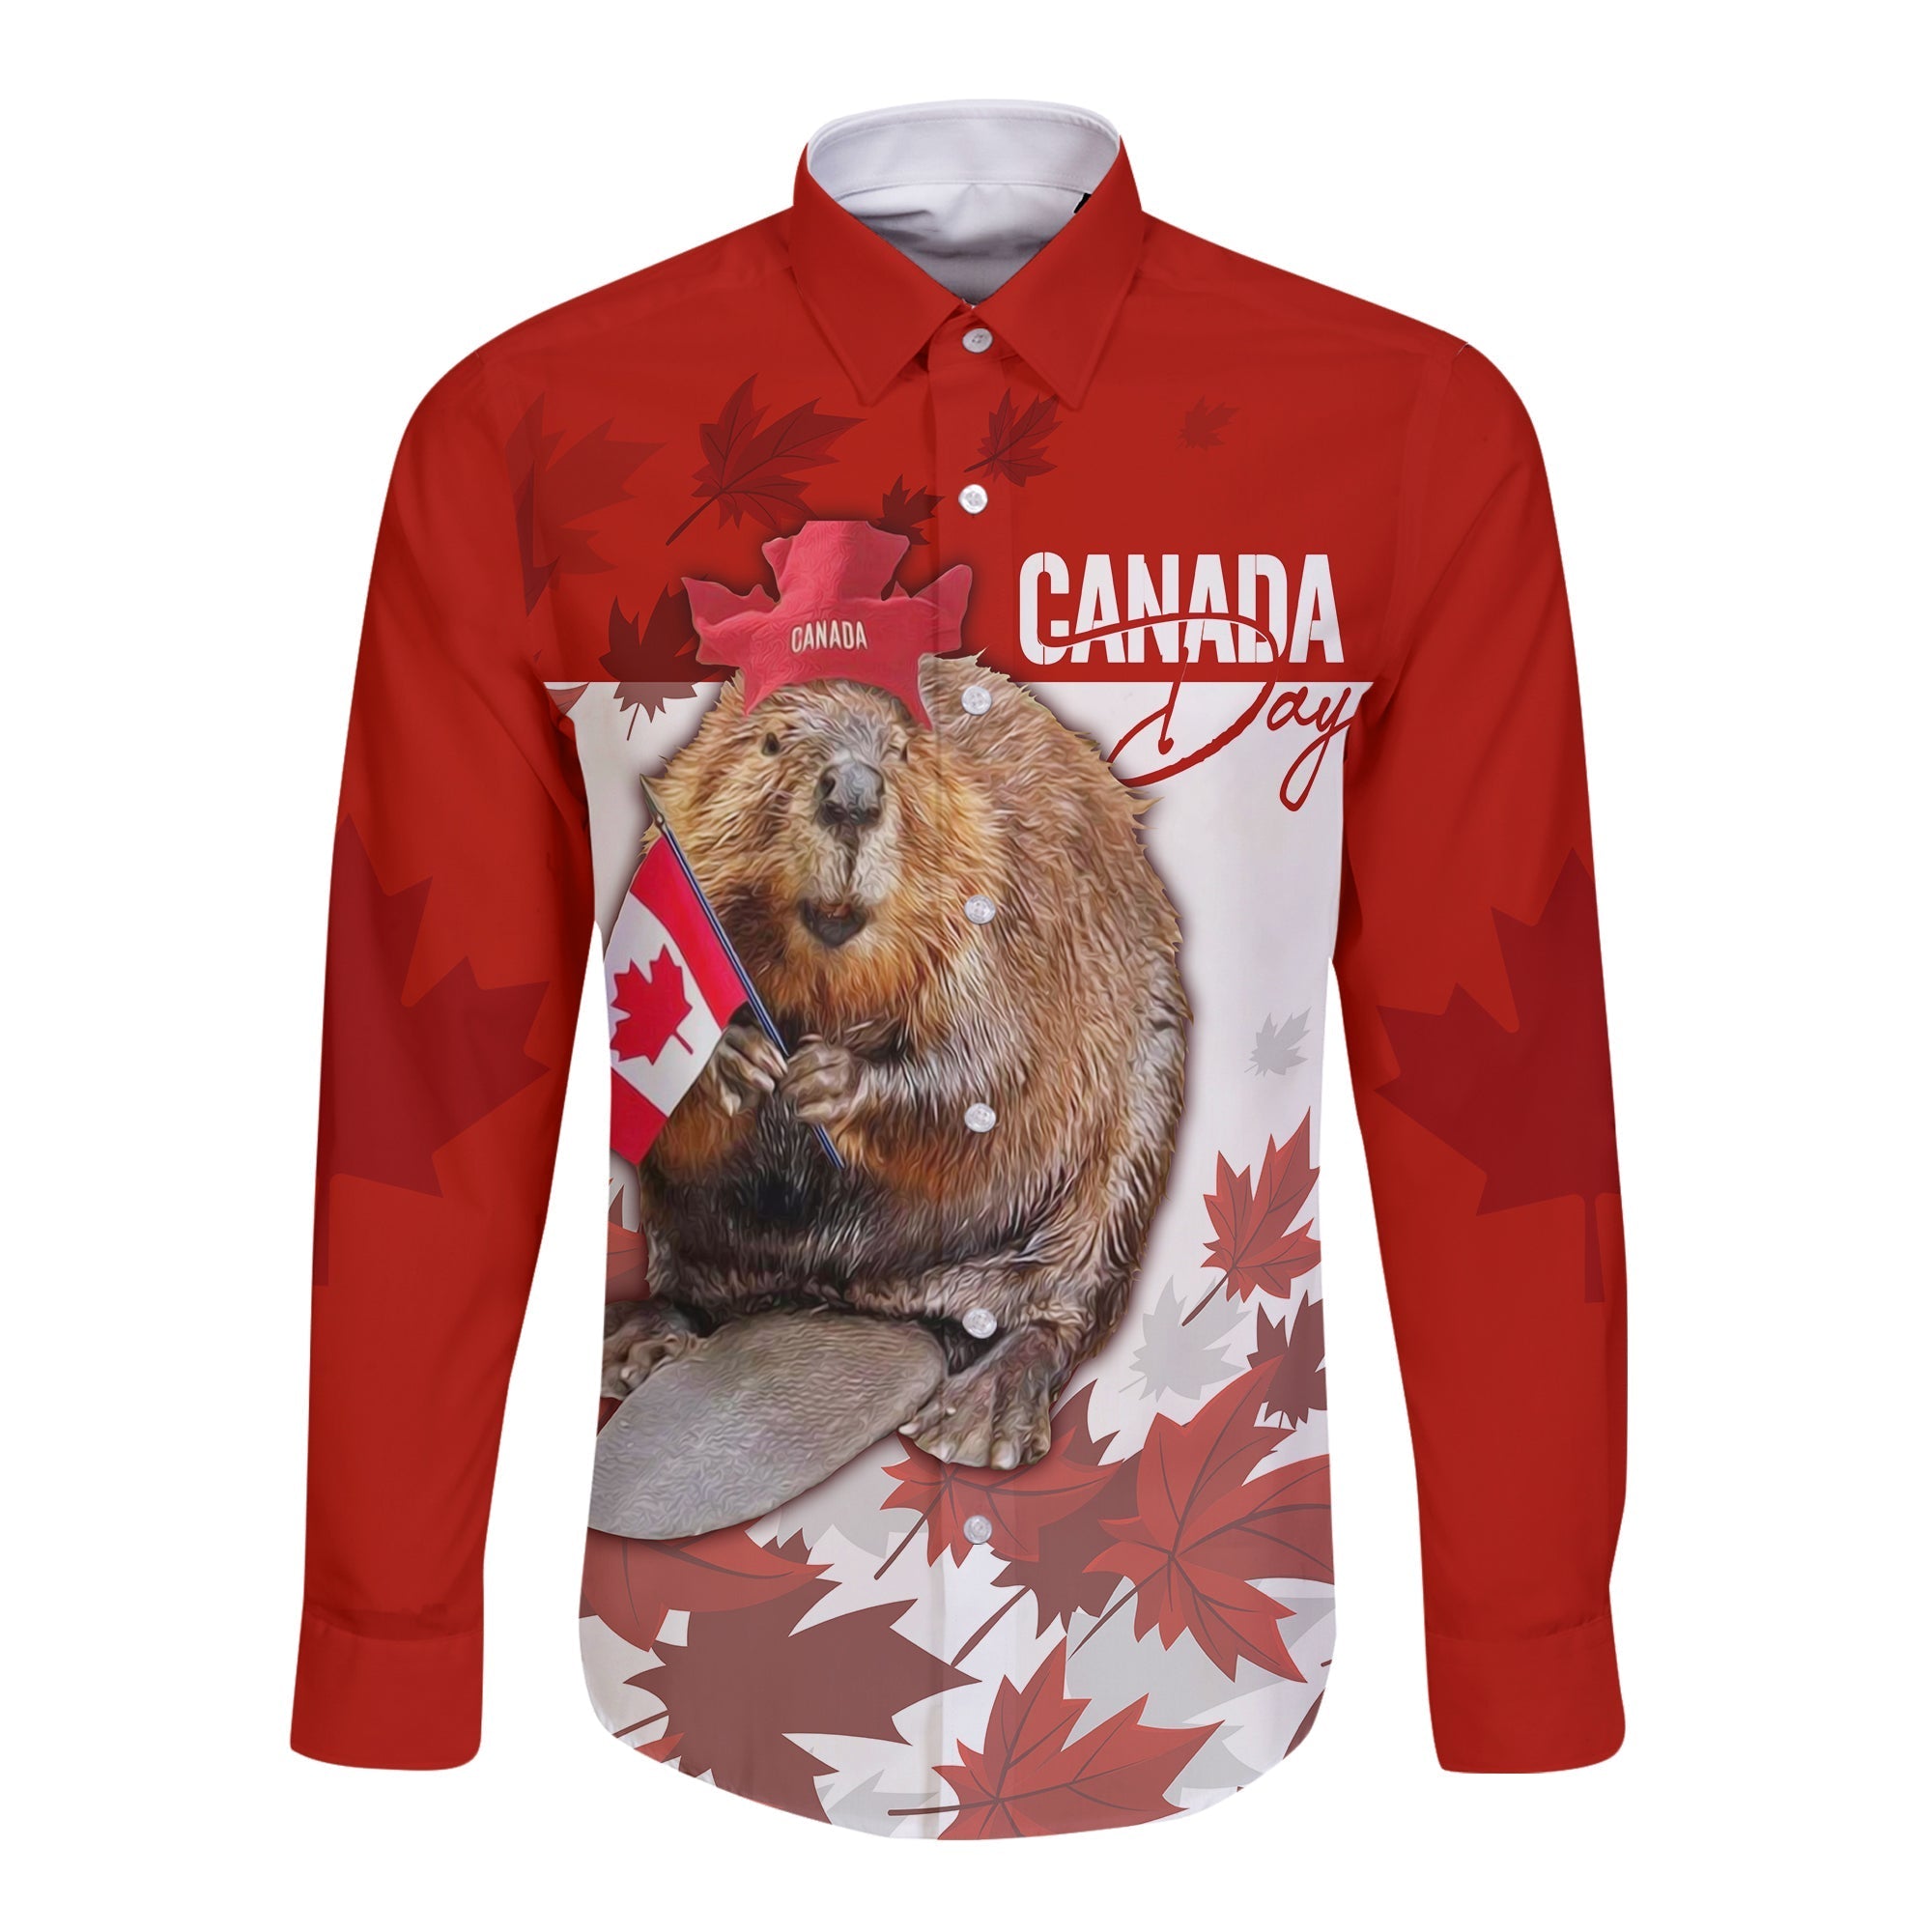 canada-day-long-sleeves-button-shirt-patriot-beaver-mix-maple-leaf